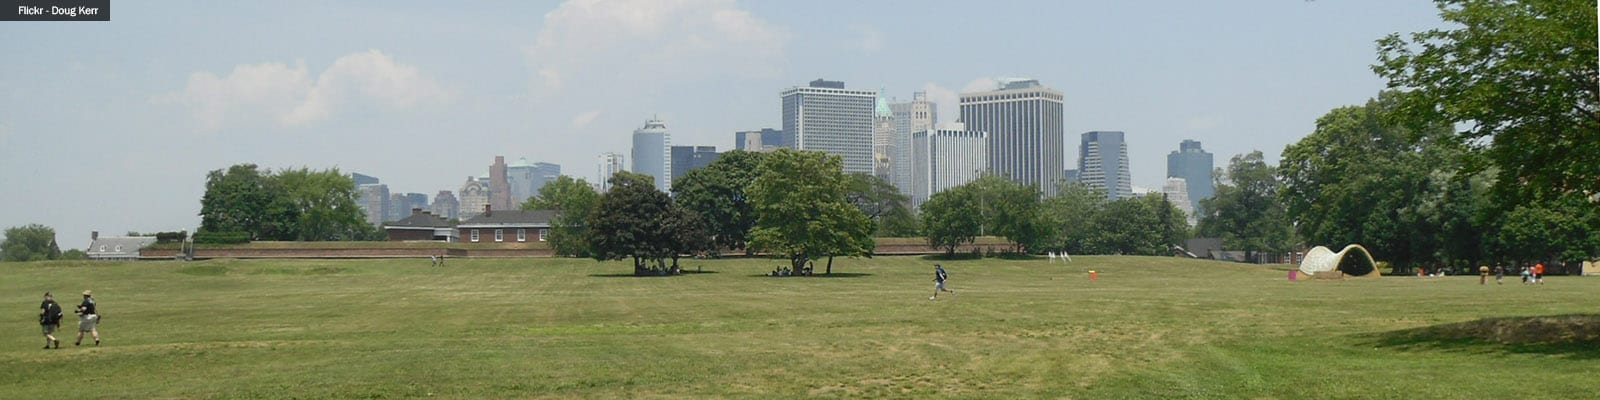 Photo of people walking through a large green space with tall buildings in the background.